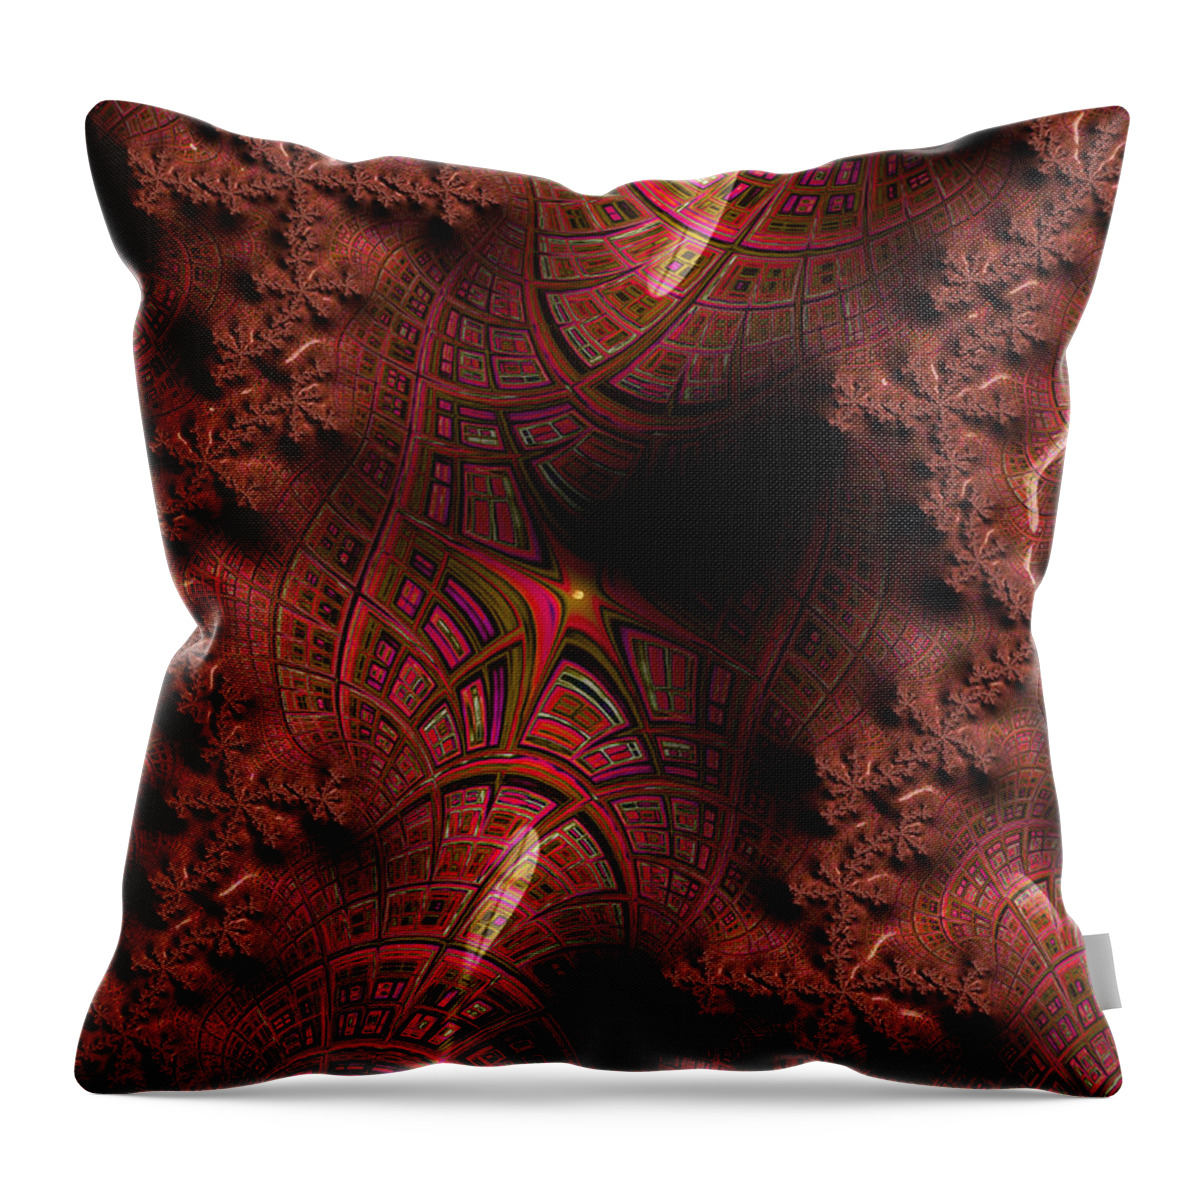 Abstract Throw Pillow featuring the digital art Cityscape by Michele A Loftus